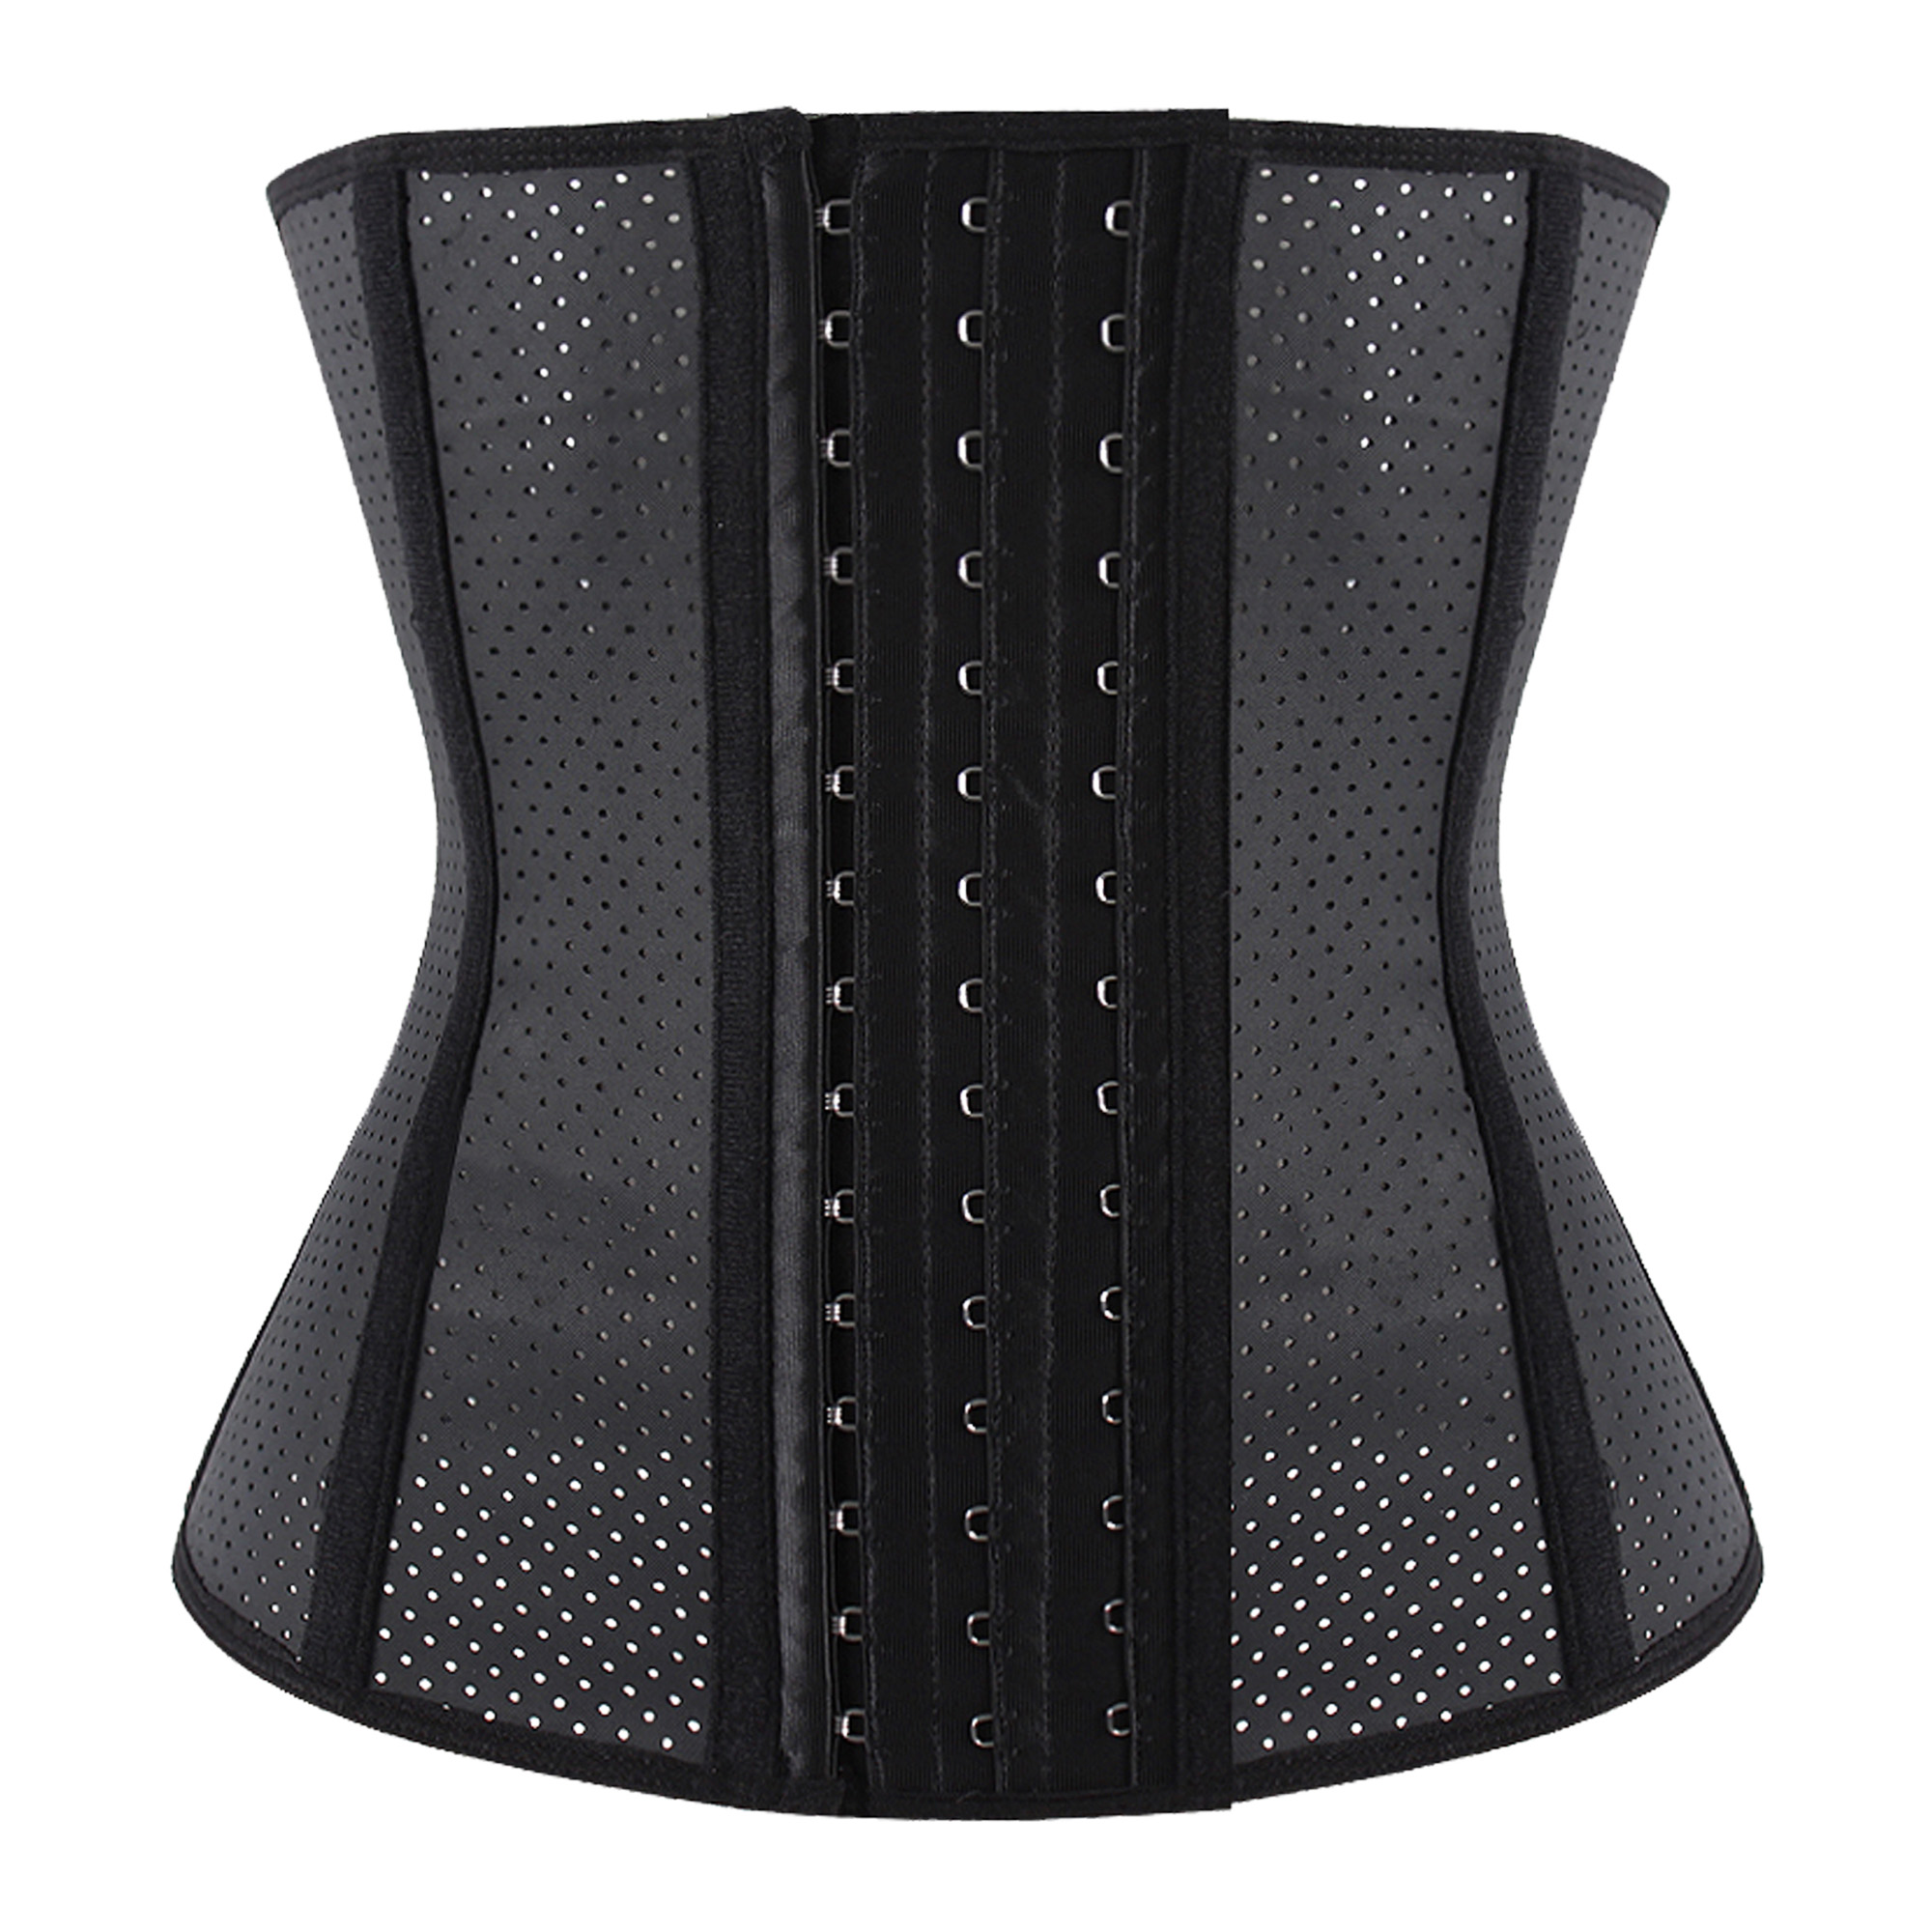 Buy a High Quality Black 9 Steel Bone Breathable Gym Latex Waist Trainer  Corset for R775.00 in South Africa - Waisting Away